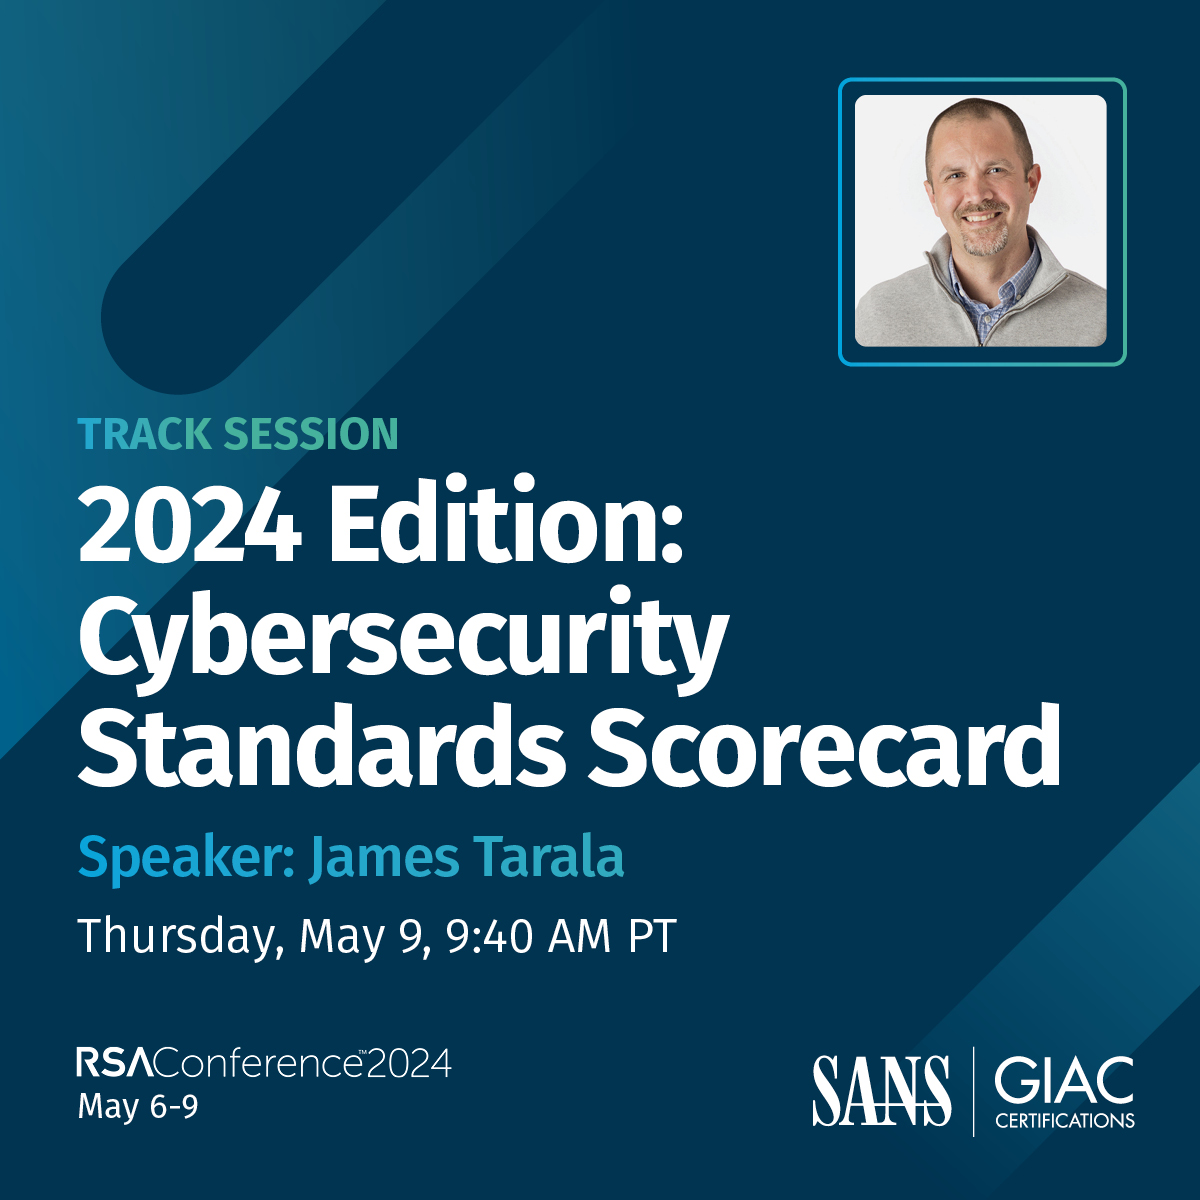 🗣️Today's Featured SANS Track Sessions & Learning Labs at RSA Conference 2024. On the final day, learn key cyber benchmarks & strategies for superior cyber defense, featuring: → @isaudit Unlock full details here → sans.org/u/1vWw @RSAConference | #Cybersecurity #RSAC